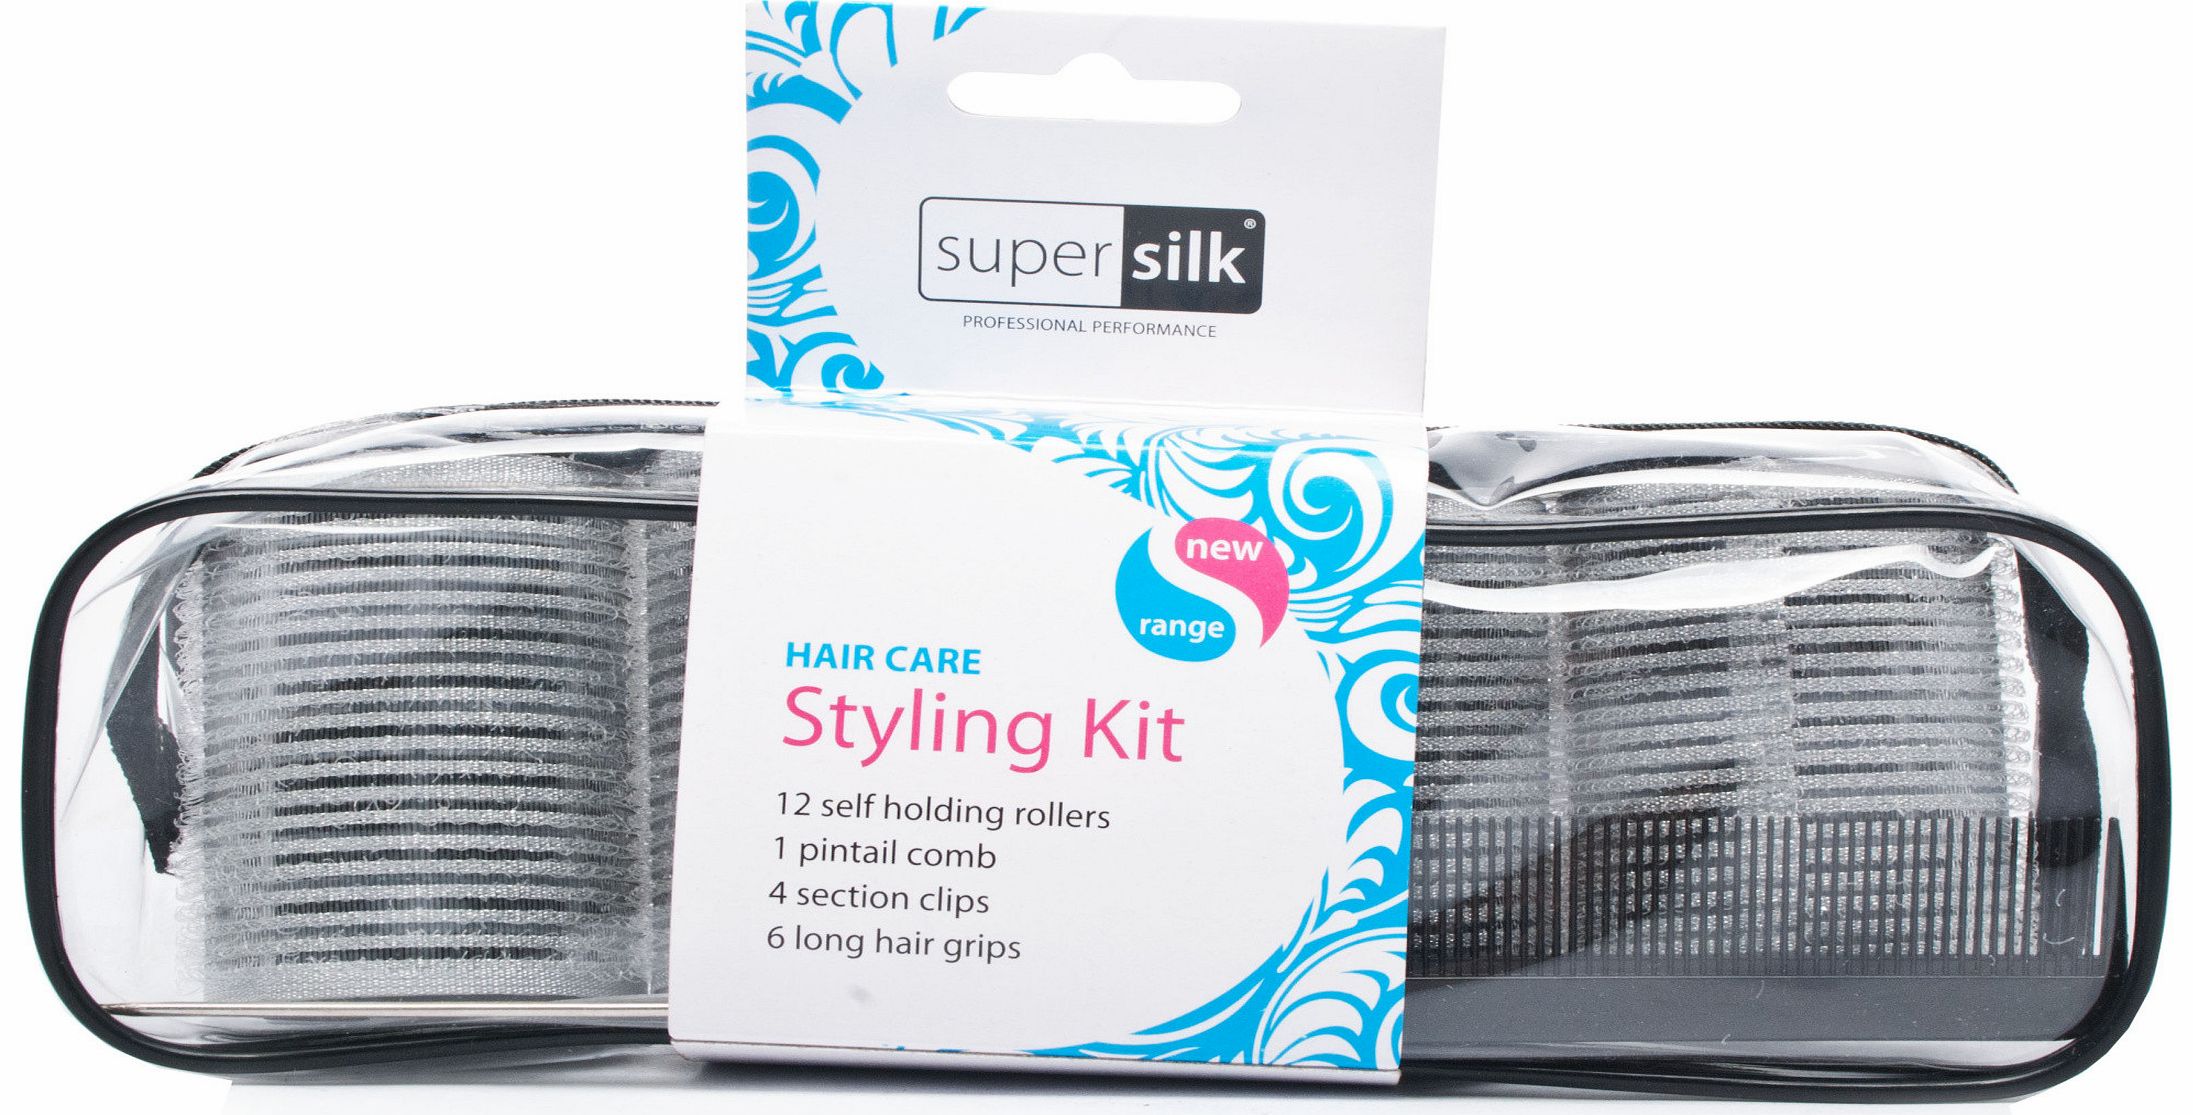 Supersilk Hair Styling Kit comes with a variety of hair styling products that can help you create the look that you desire. With this kit, you can create a salon inspired looks without the salon prices. Treat yourself today to a Supersilk Hair Stylin